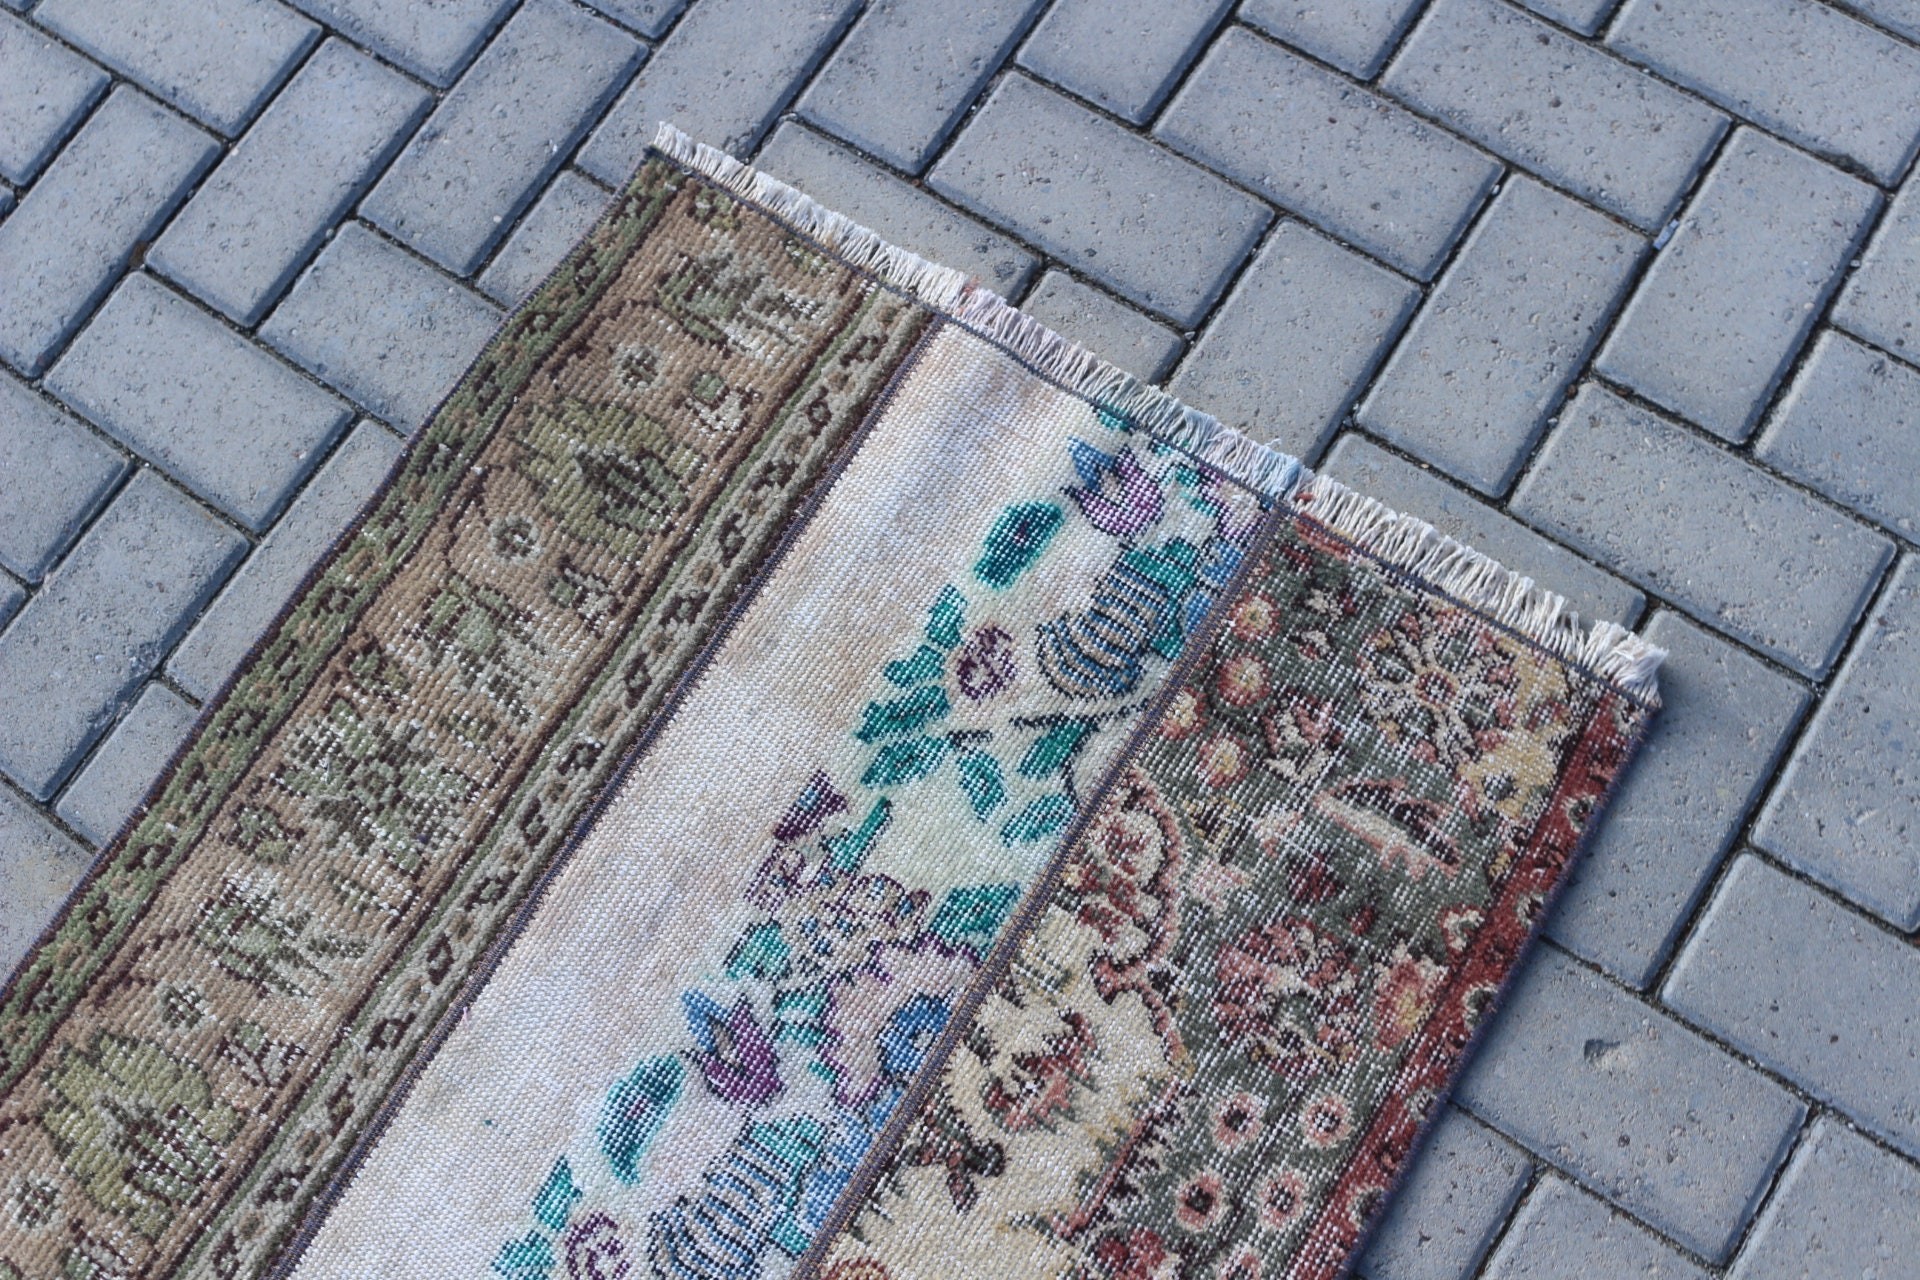 Car Mat Rug, Bath Rug, Vintage Rugs, Turkish Rugs, Moroccan Rugs, 2.3x2.8 ft Small Rug, Rugs for Kitchen, Beige Kitchen Rug, Kitchen Rugs